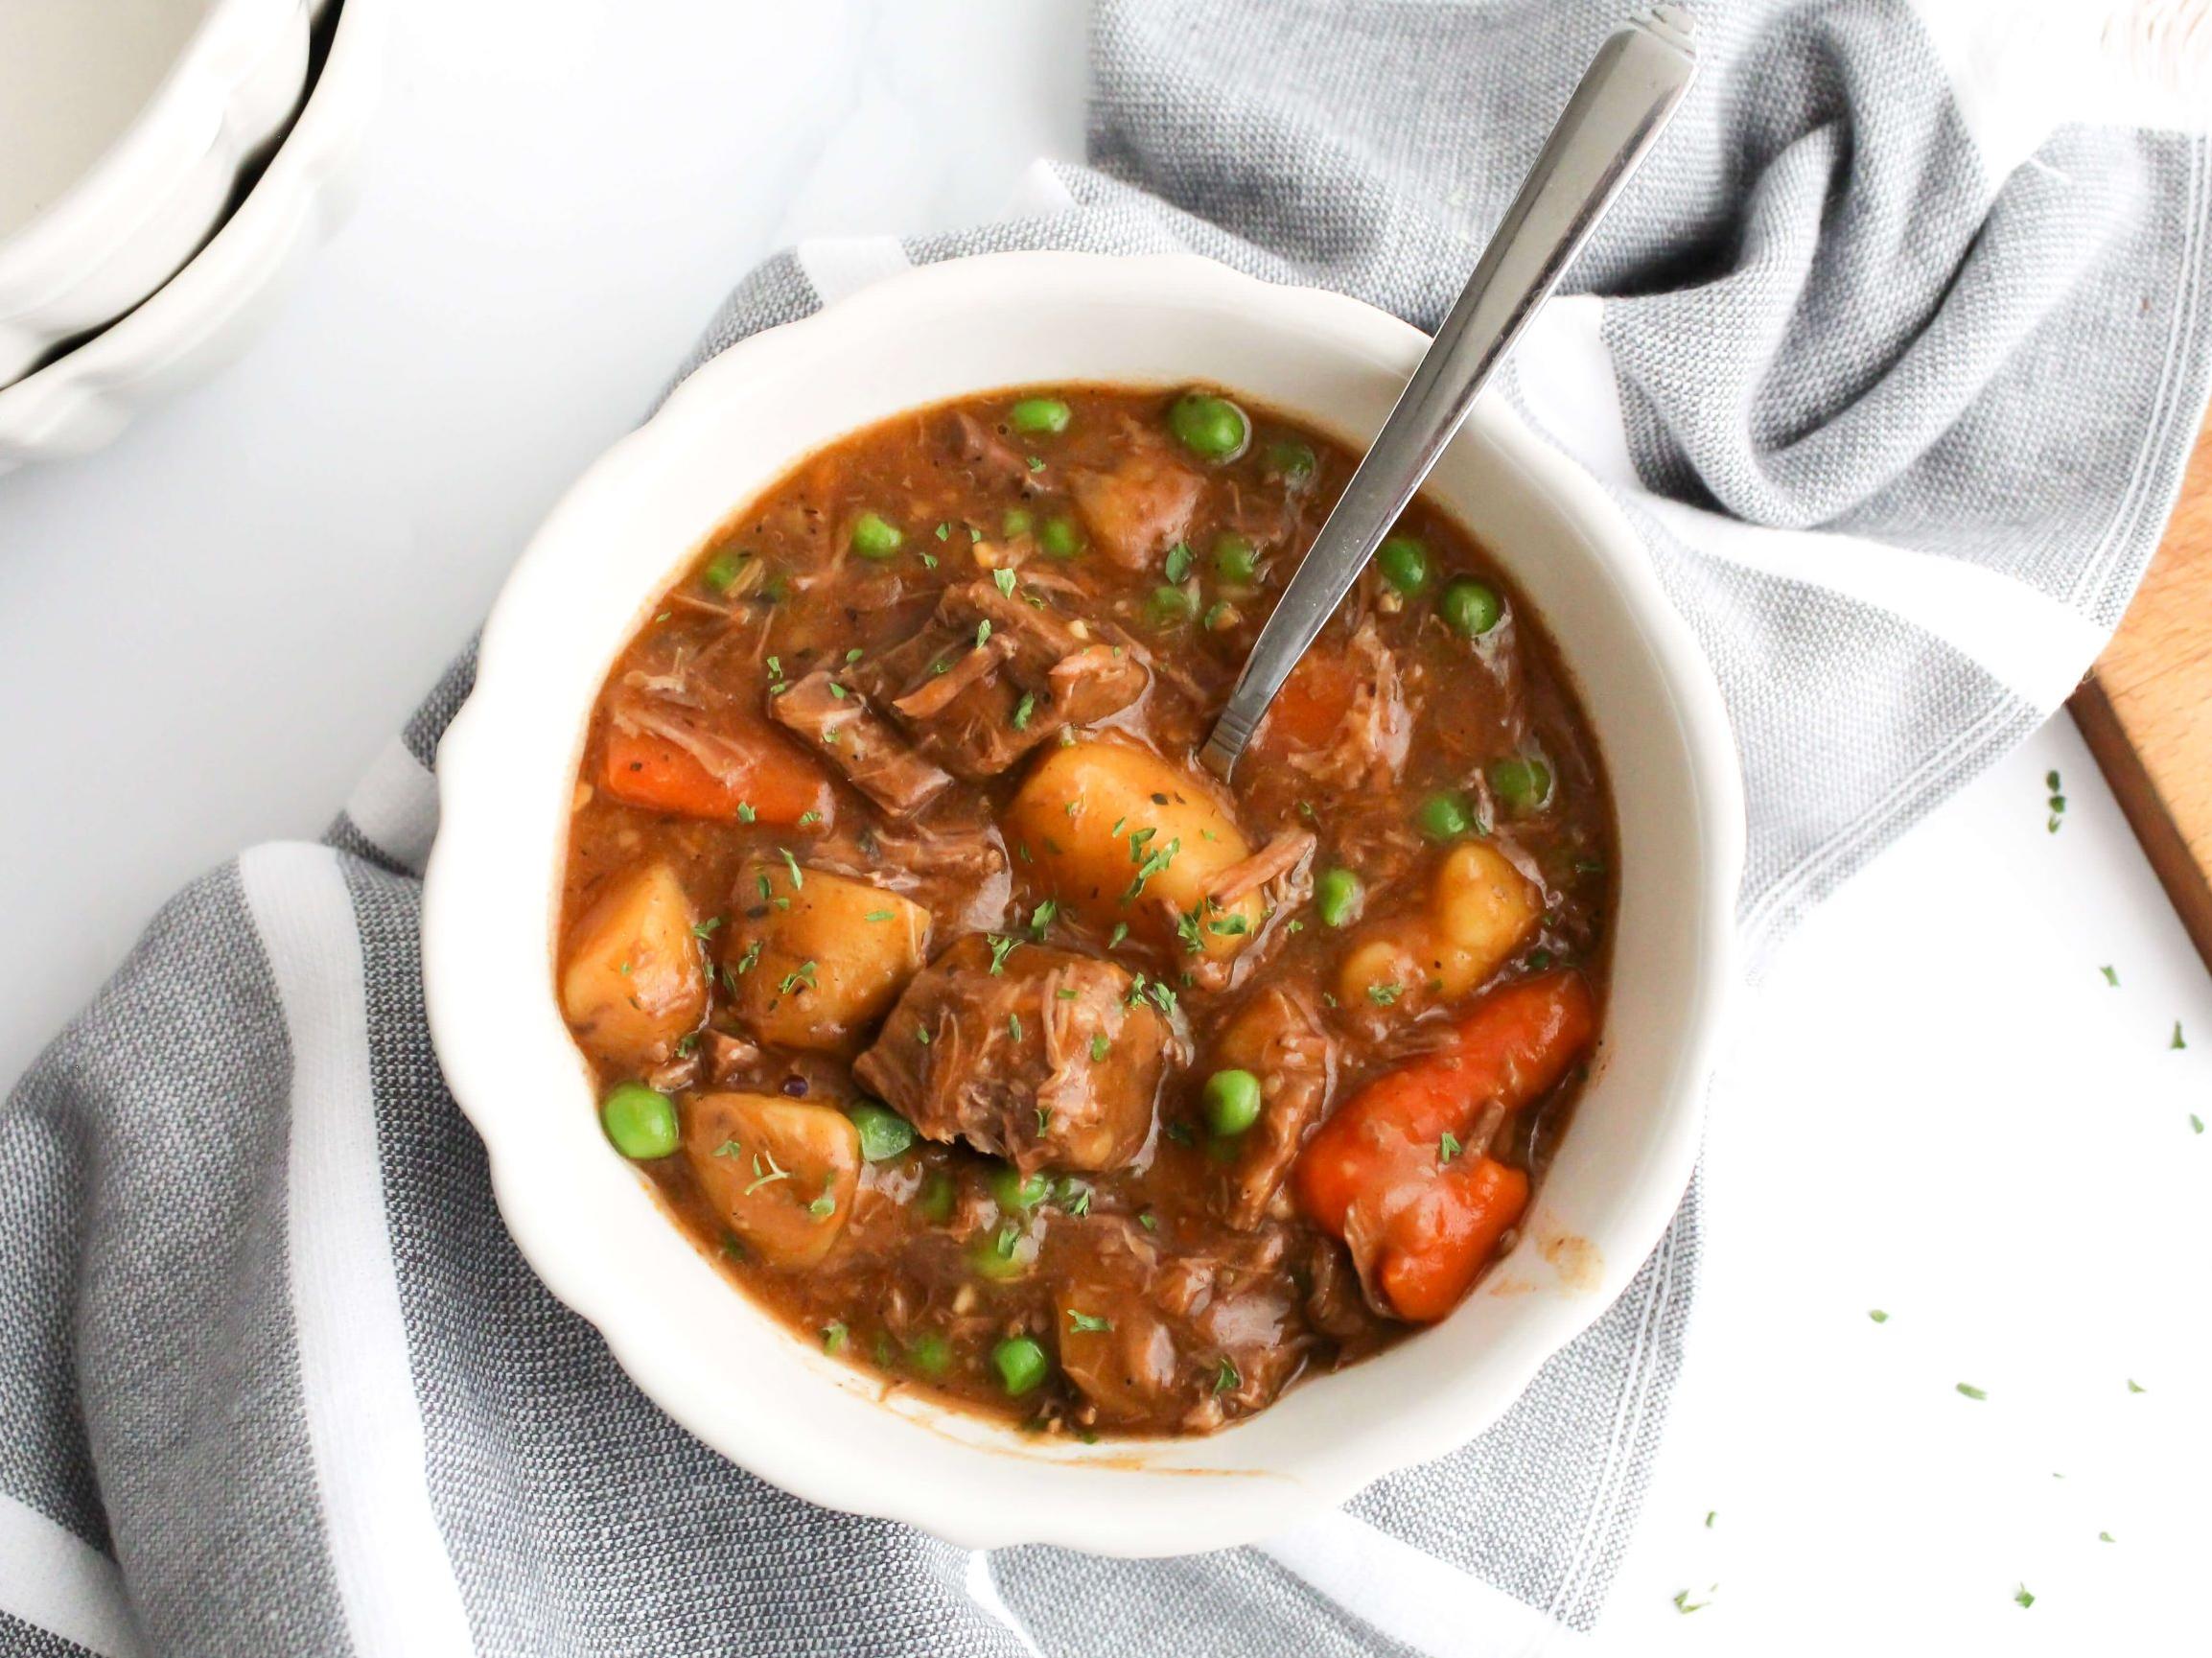  One bite of this Irish Stew and you'll be transported to a cozy Irish pub.